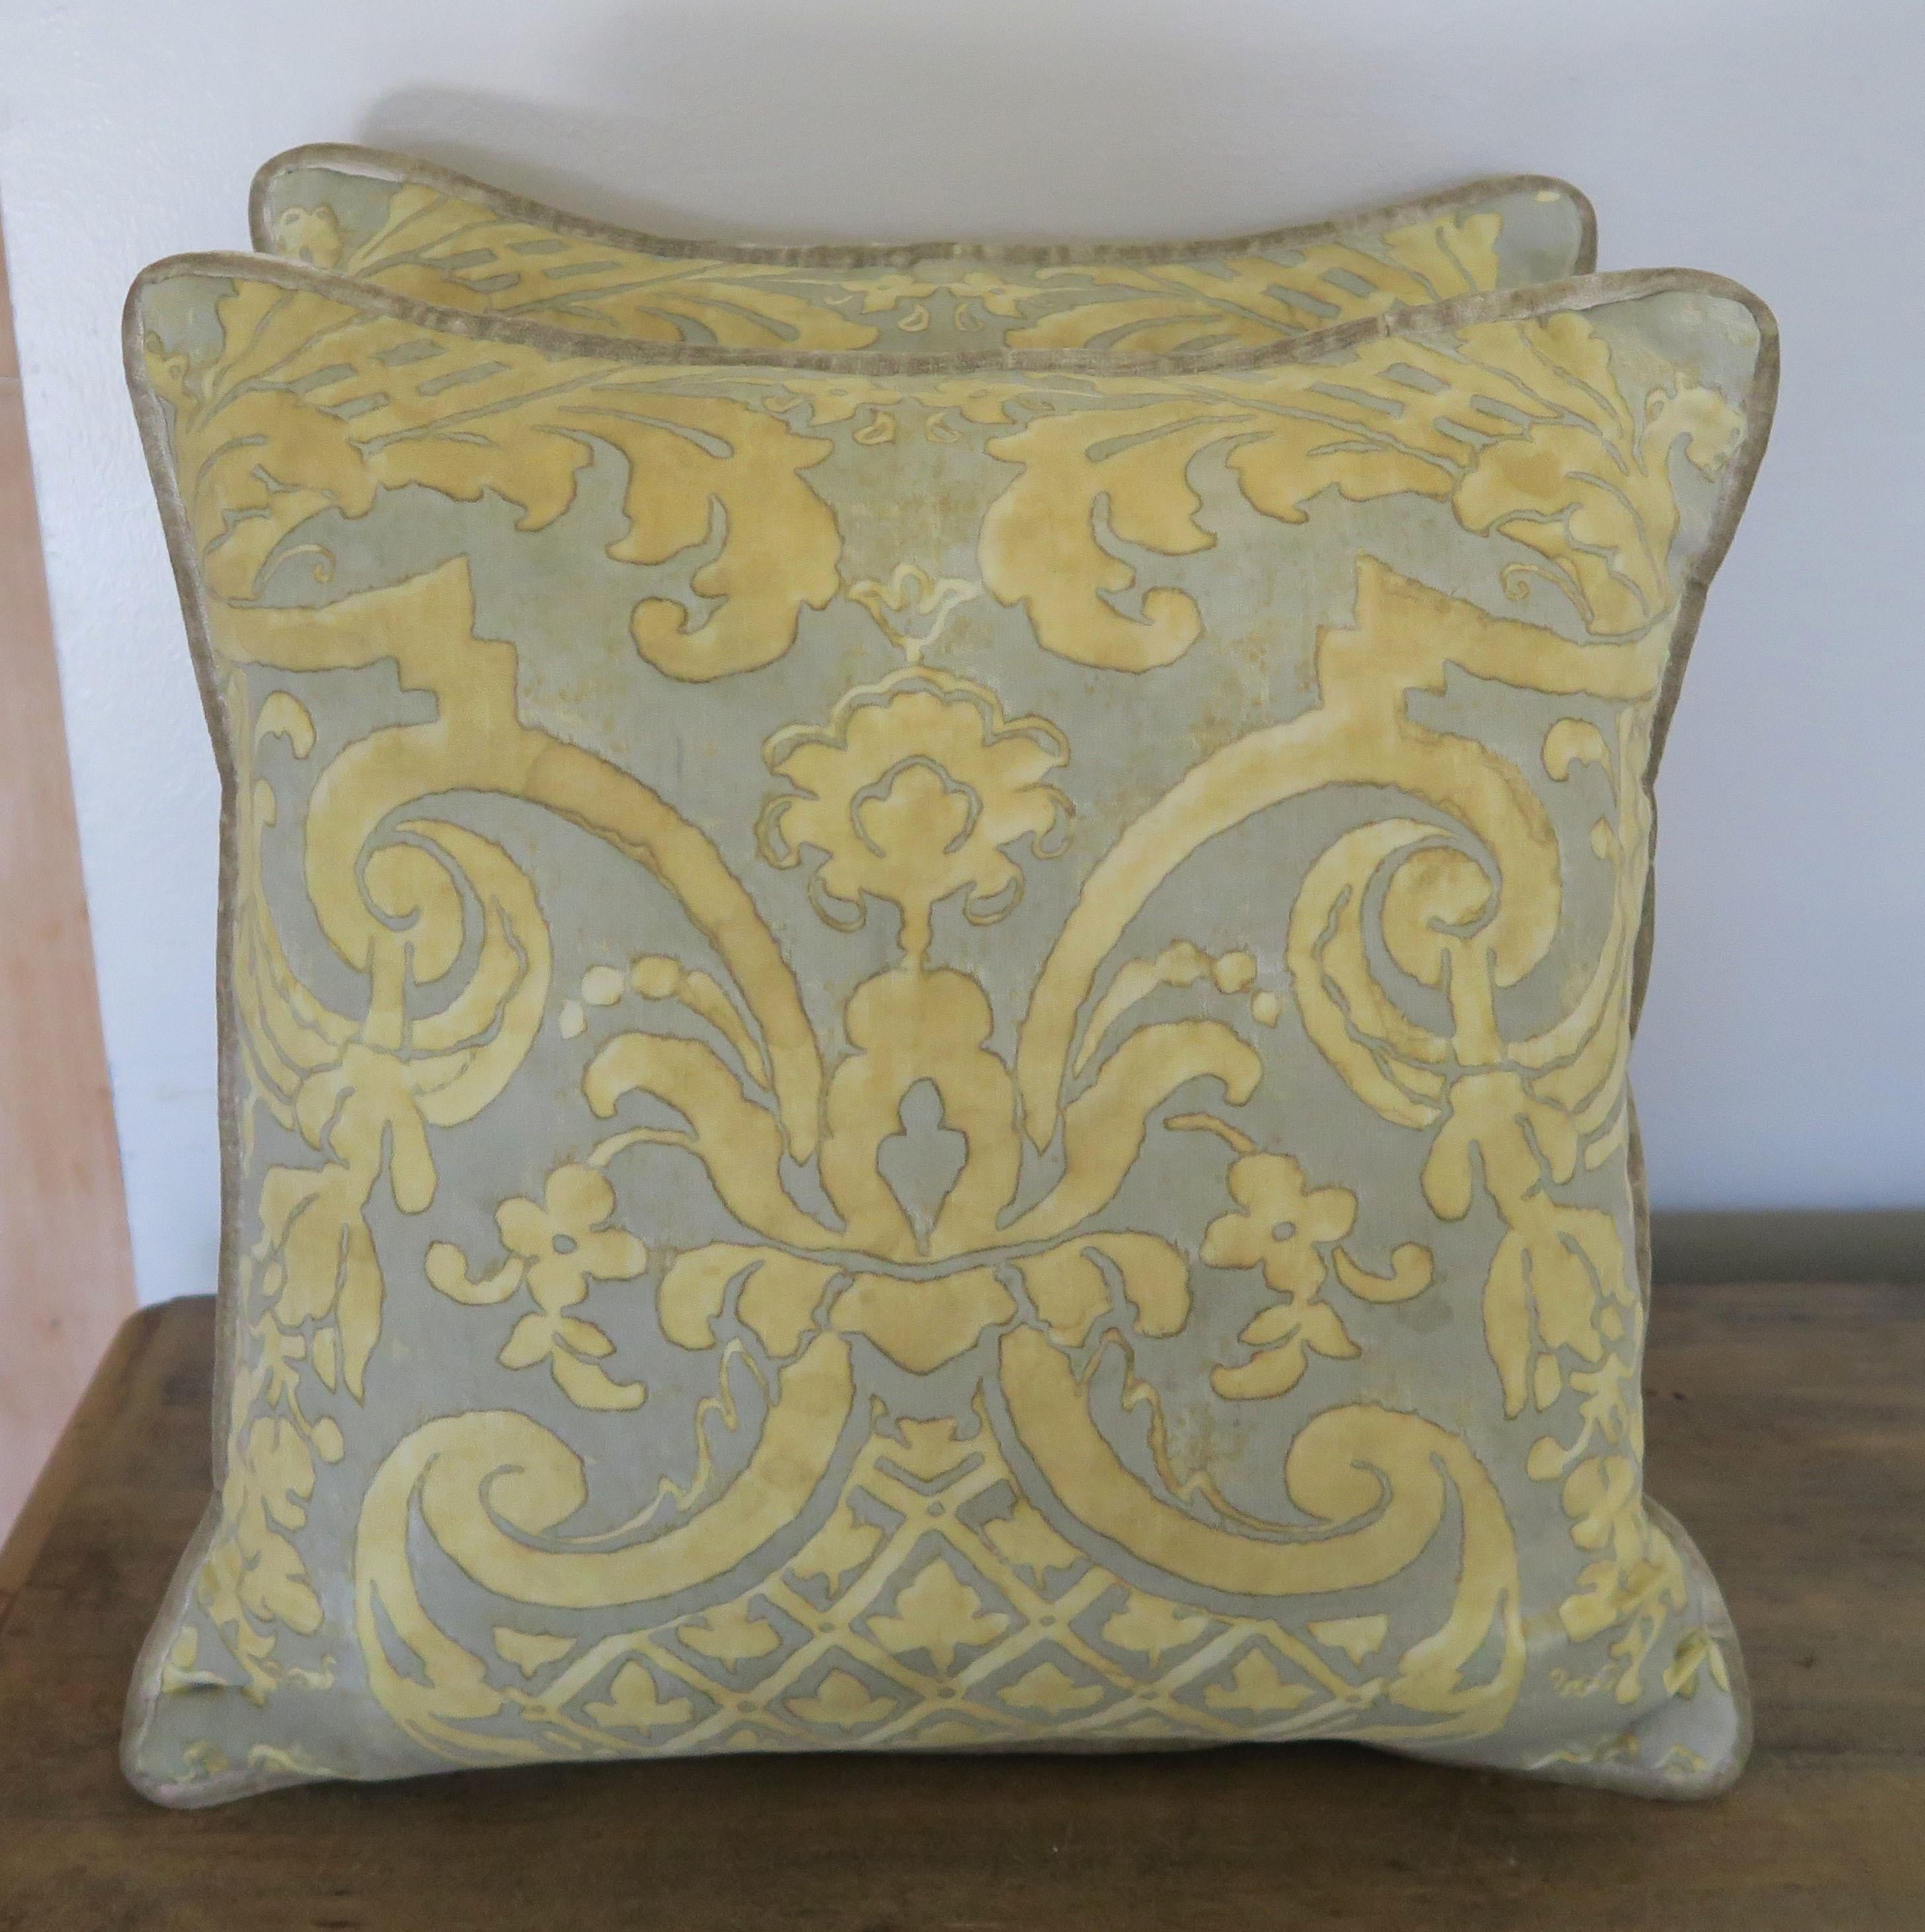 A pair of custom Carnavalet patterned Fortuny pillows made from vintage faded gold and taupe colored cotton Fortuny fronts and silvery velvet backs. Self cord detail, down inserts, sewn closed.